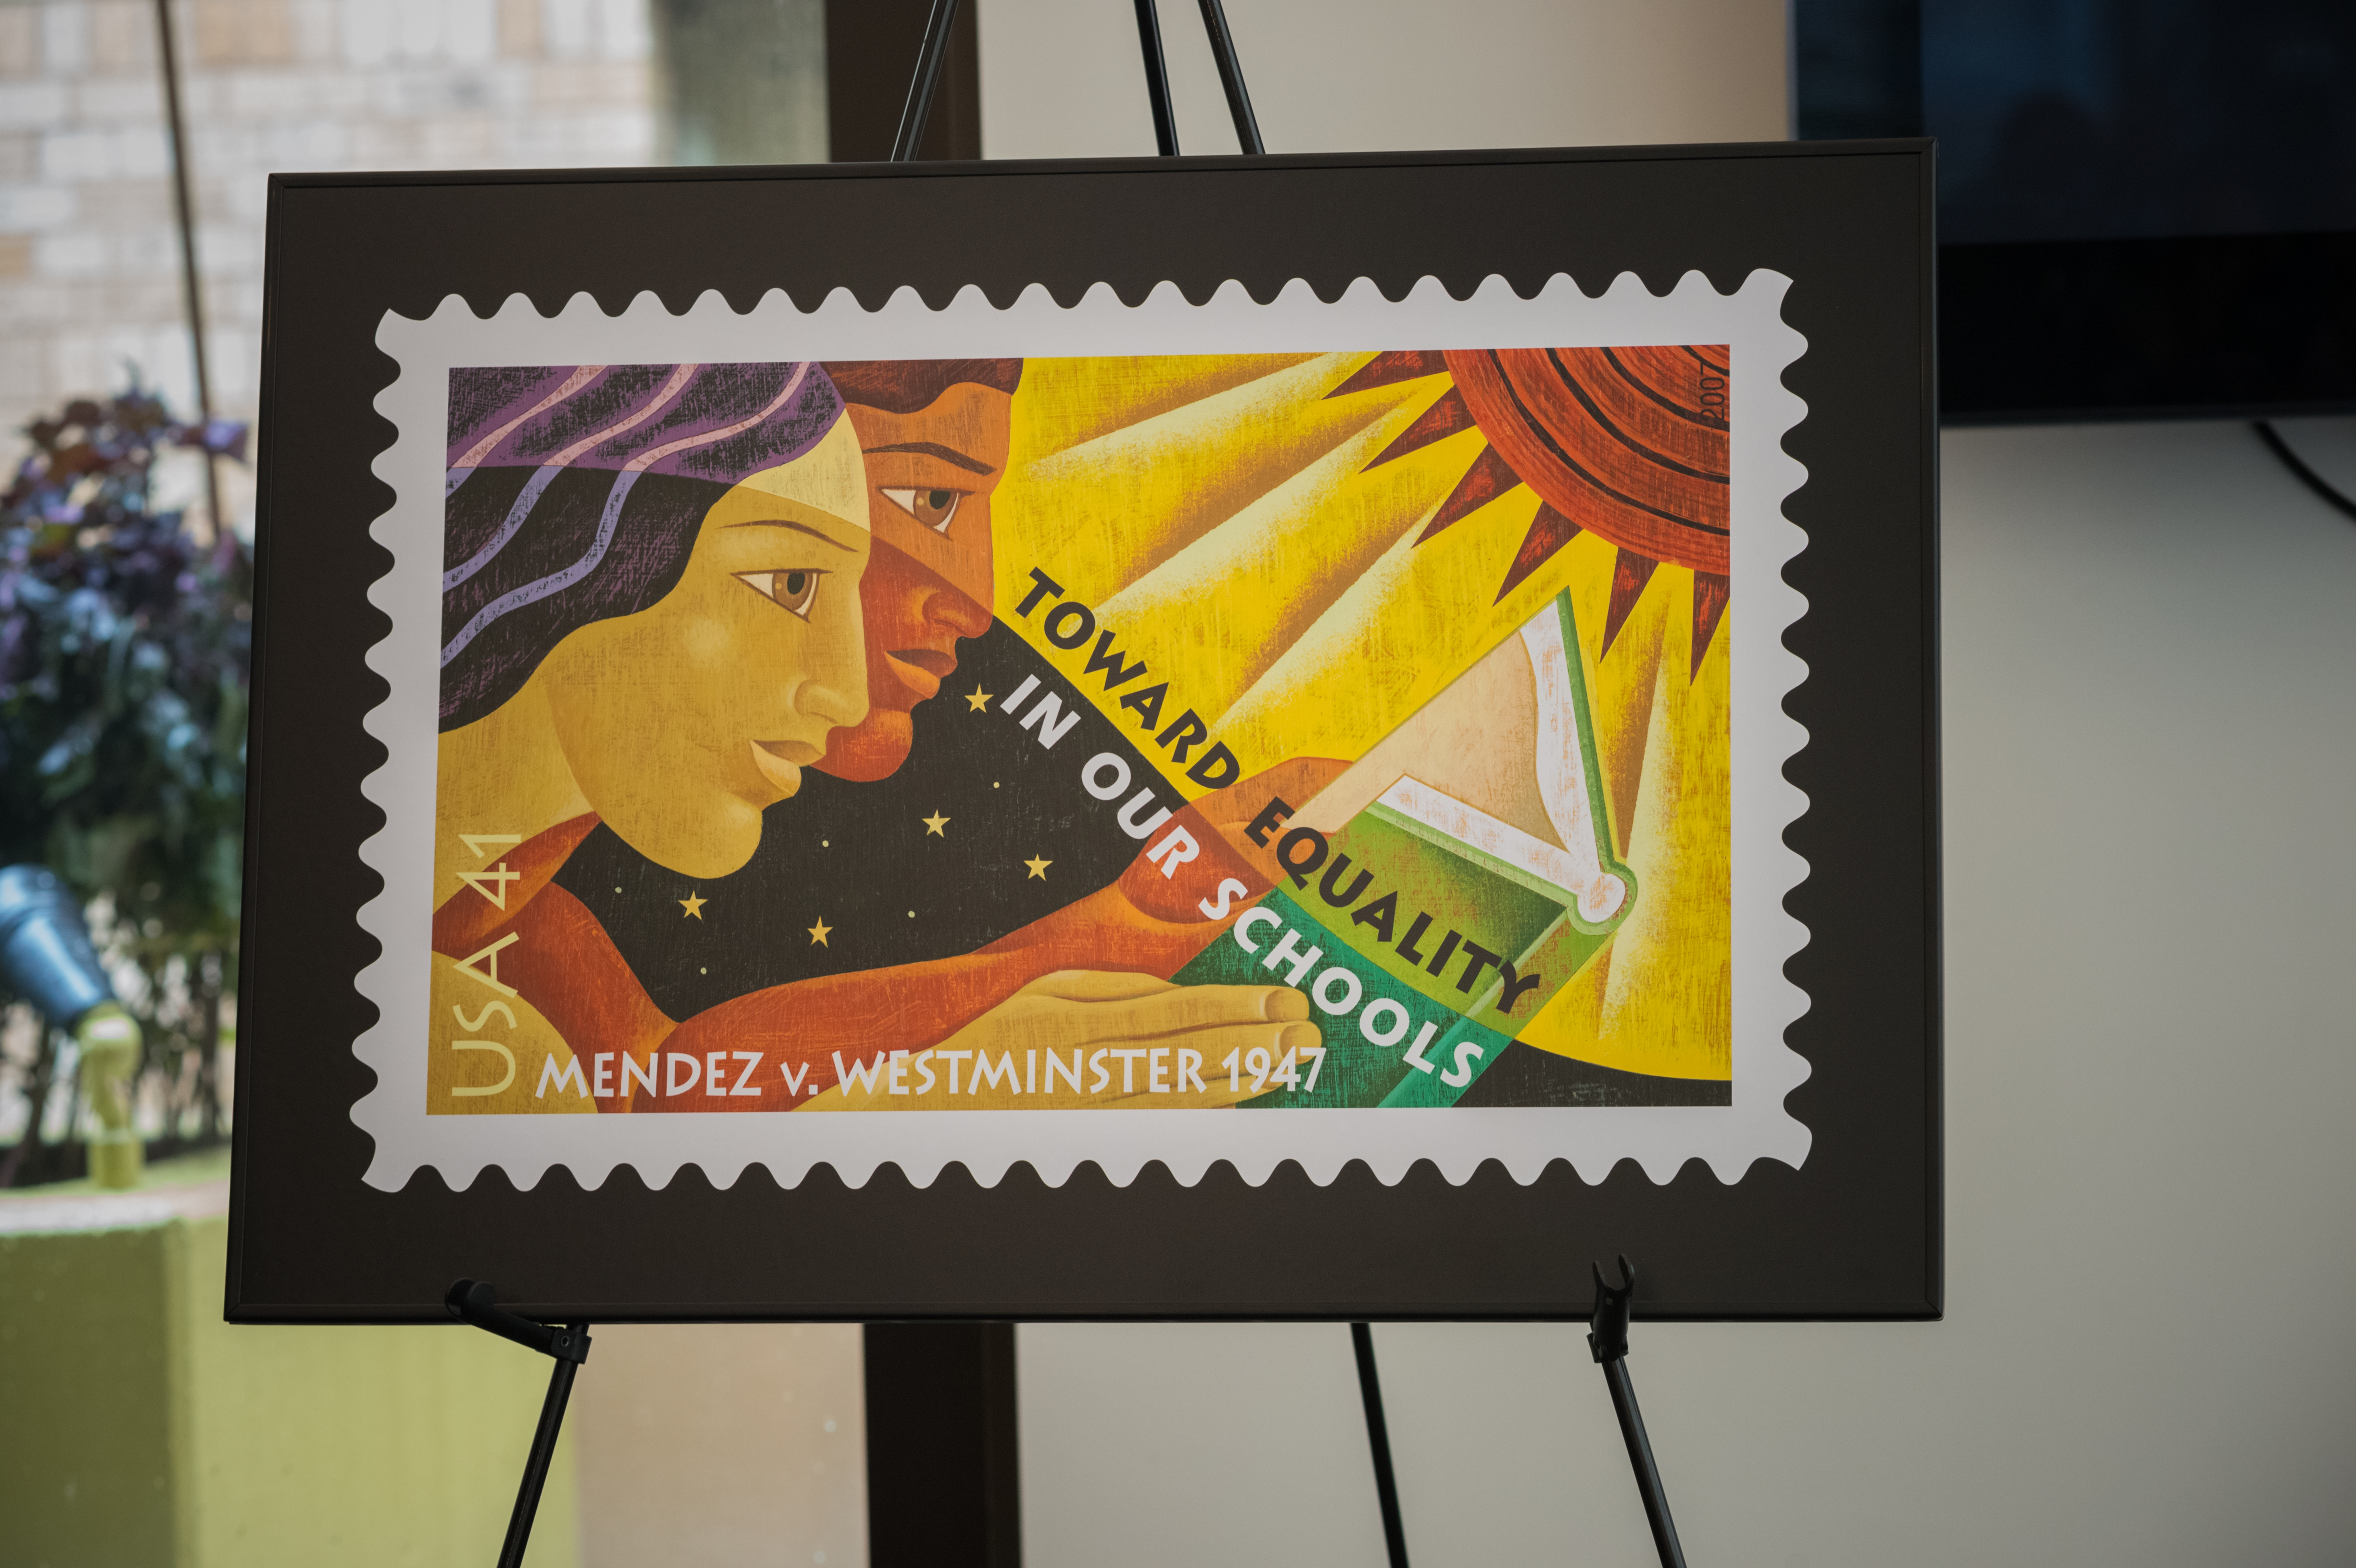 The first issue stamp from 2007 celebrating the Mendez v. Westminster School District case